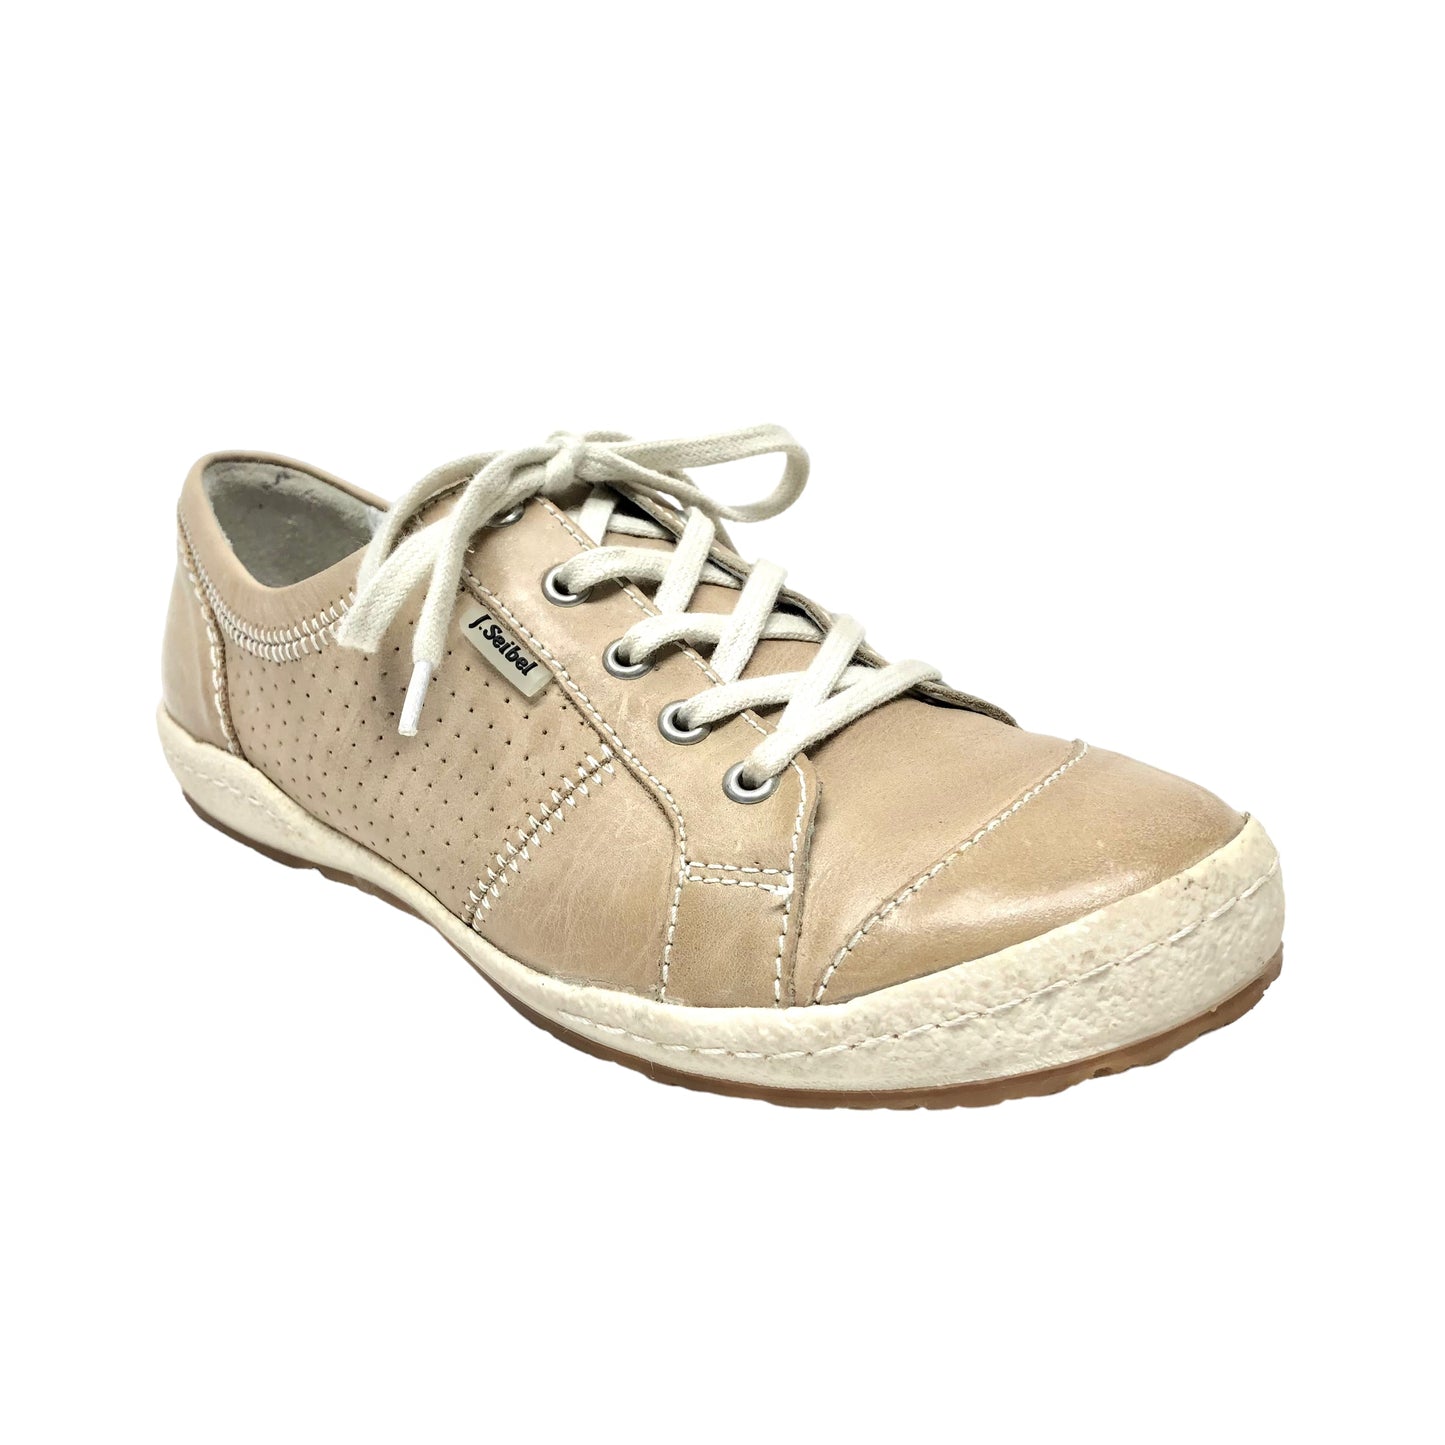 Shoes Sneakers By Josef Seibel  Size: 6.5